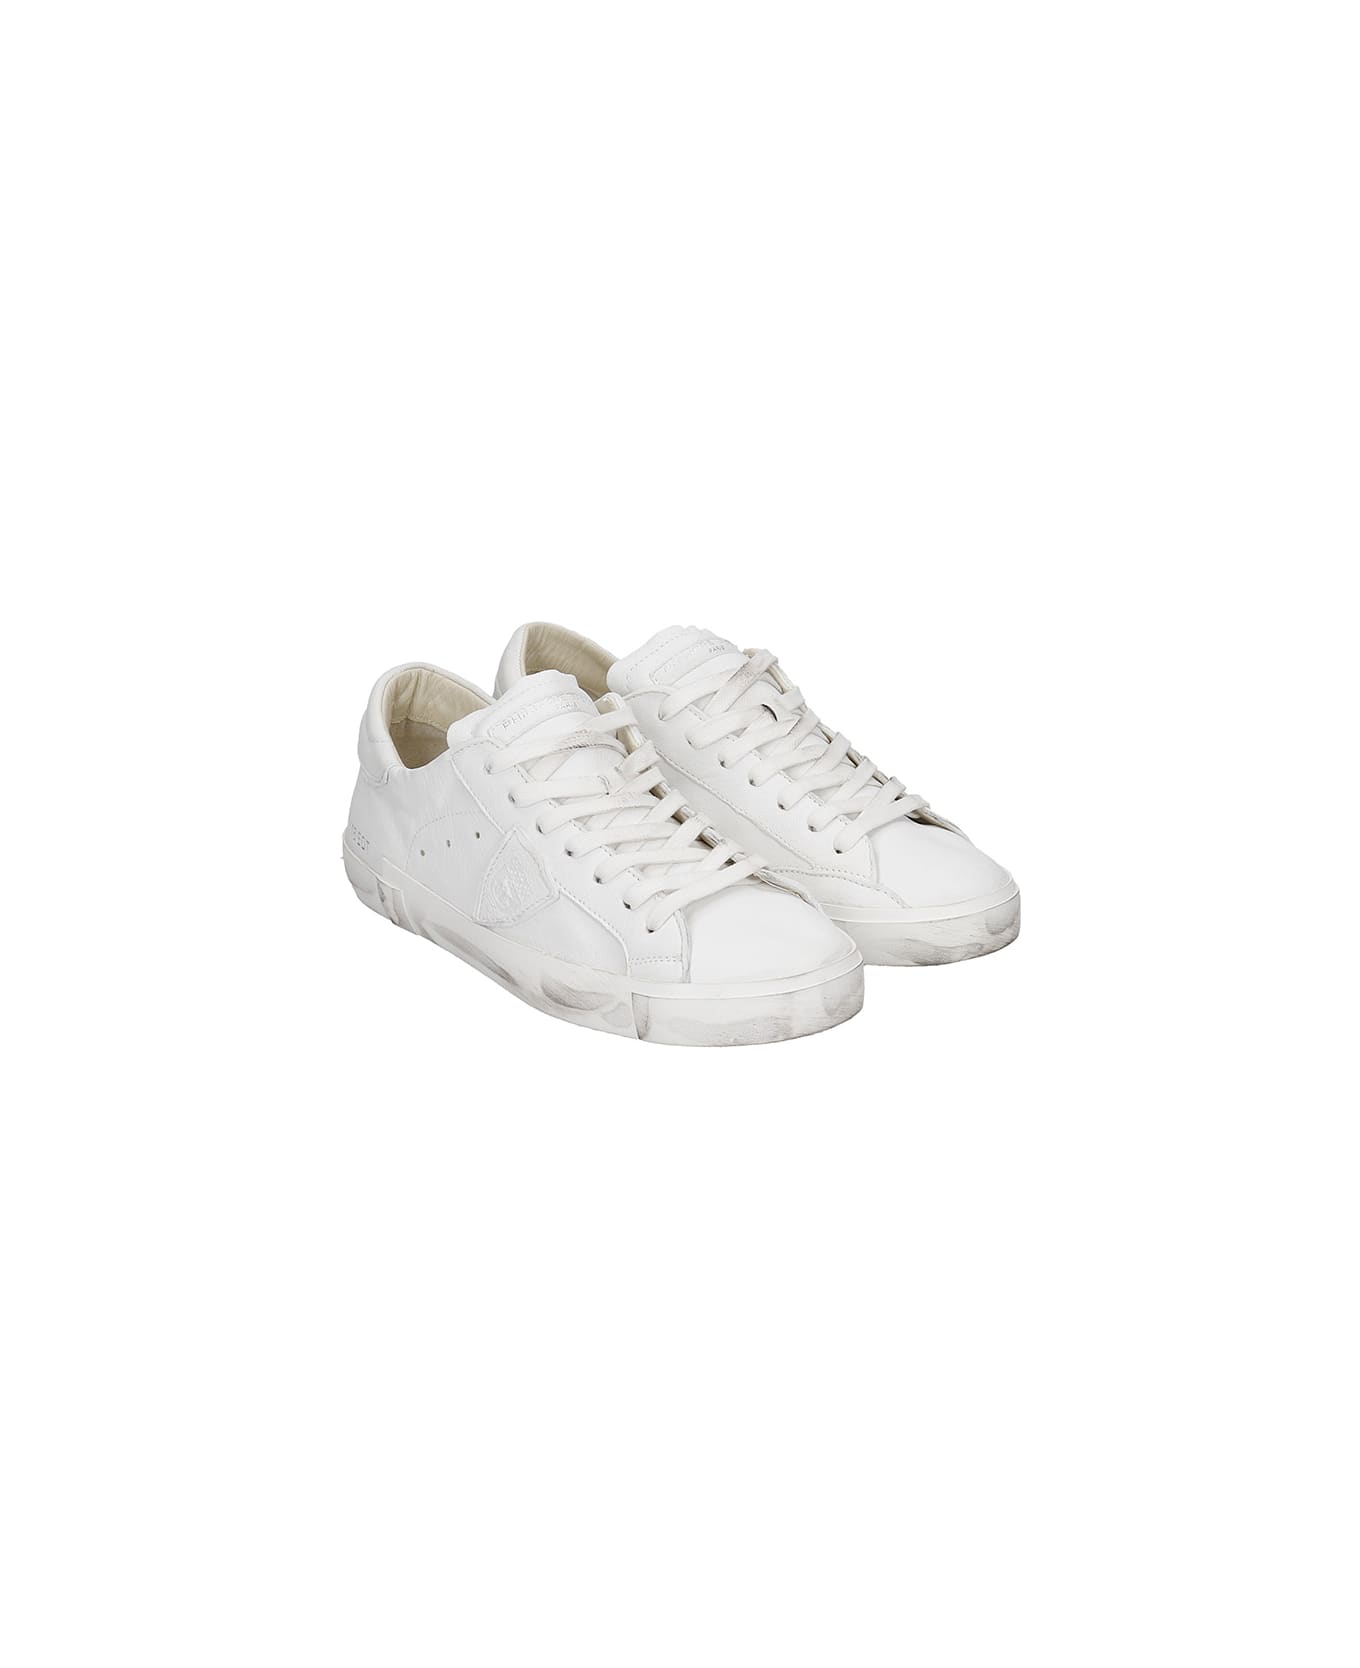 Philippe Model Prsx L Sneakers In White Leather - Basic Blanc